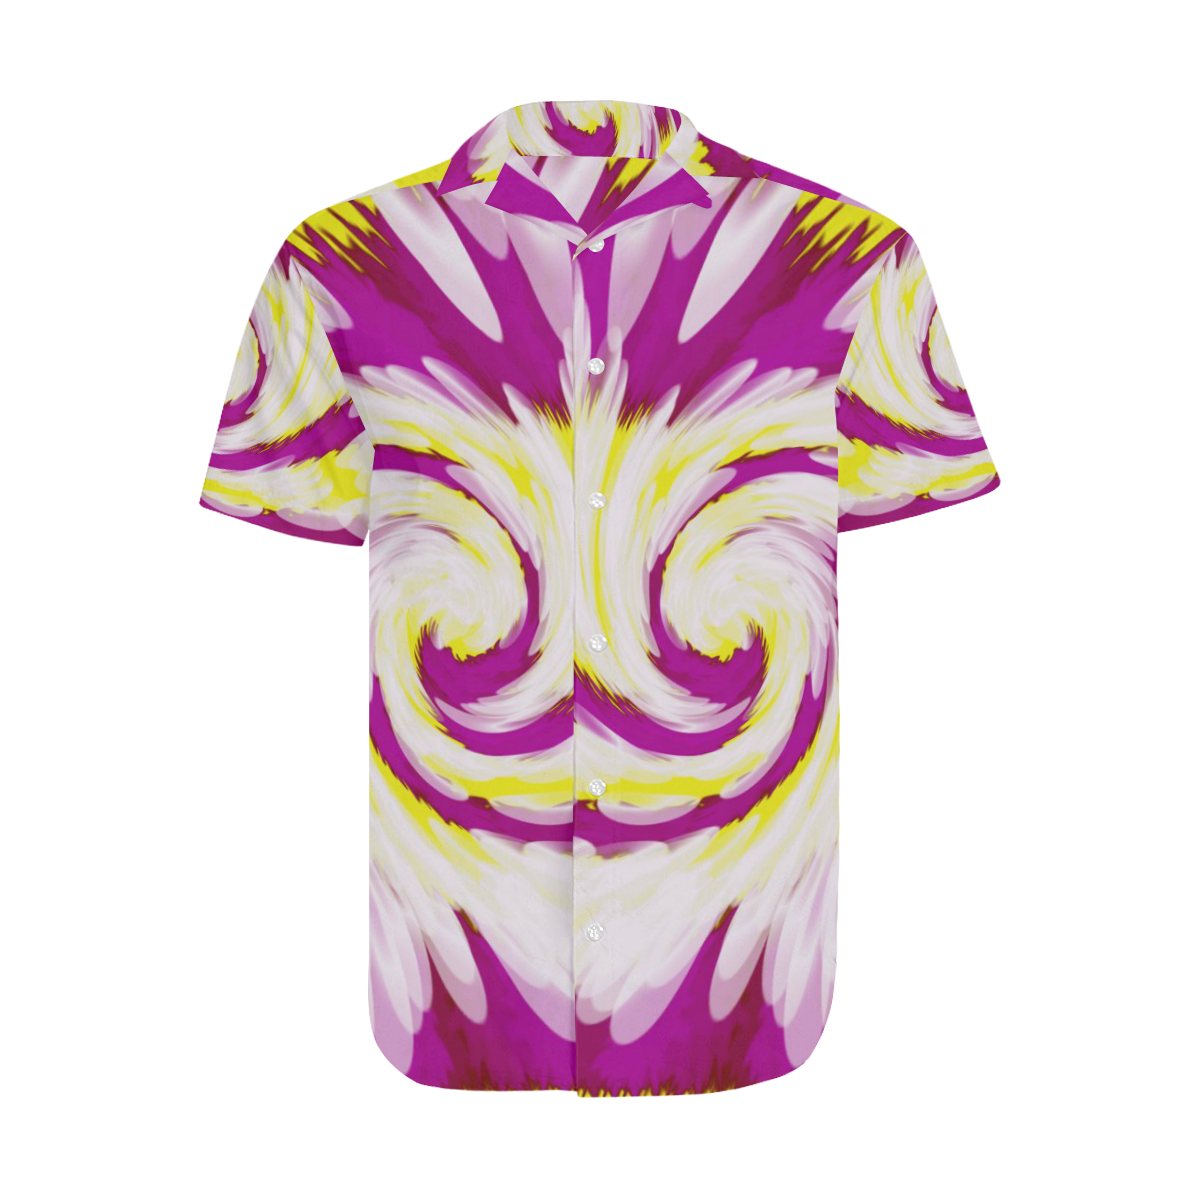 Pink Yellow Tie Dye Swirl Abstract Men's Short Sleeve Shirt with Lapel Collar (Model T54)